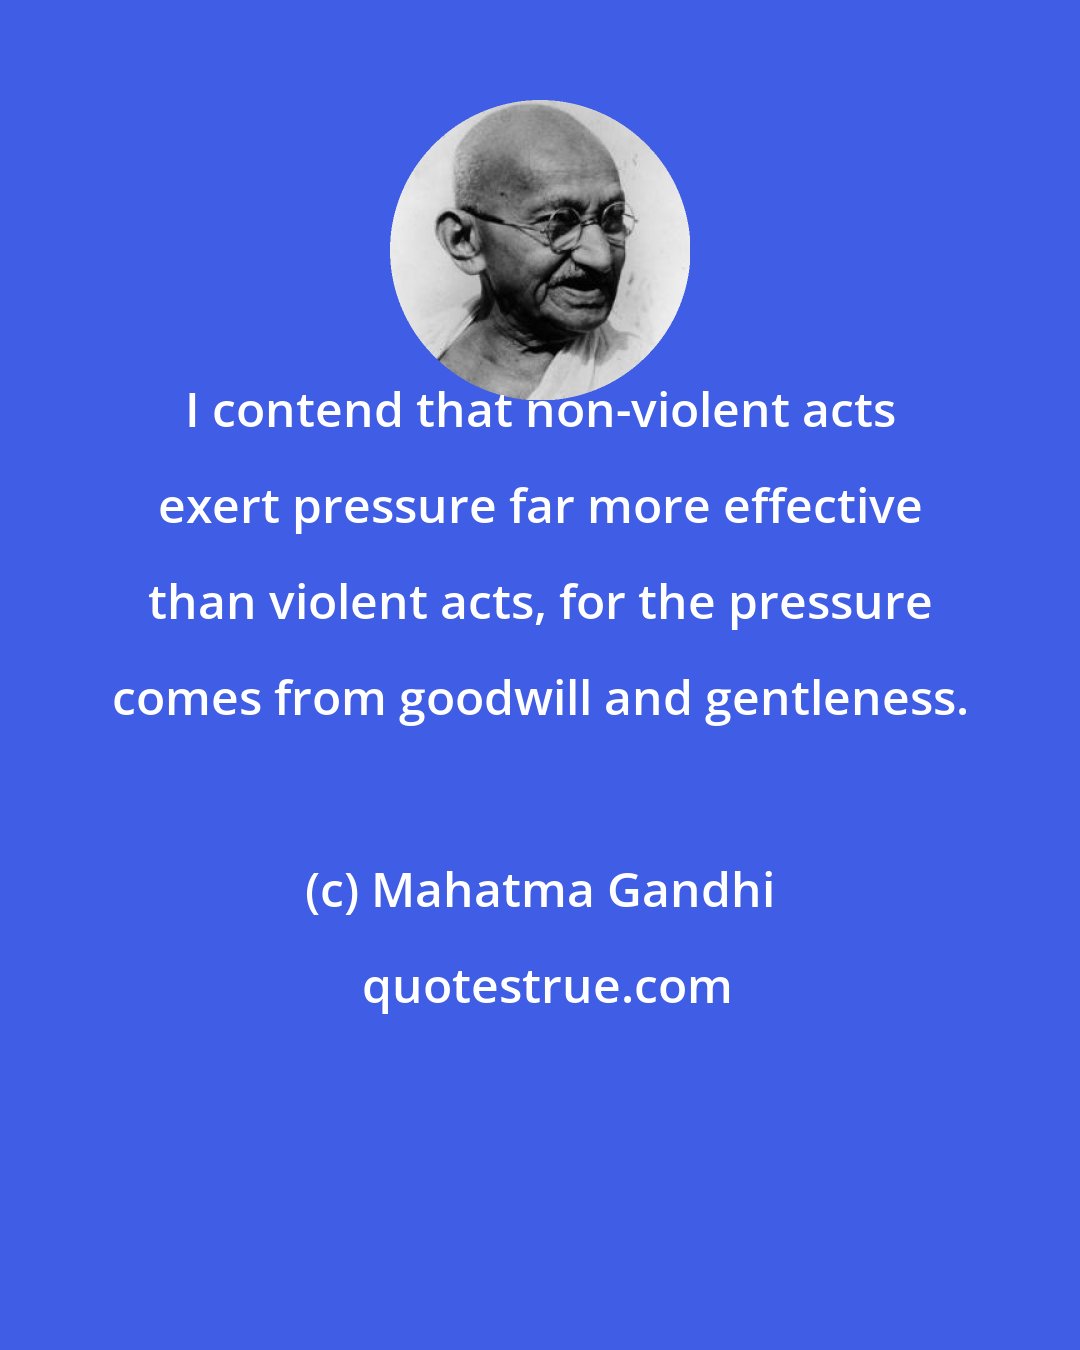 Mahatma Gandhi: I contend that non-violent acts exert pressure far more effective than violent acts, for the pressure comes from goodwill and gentleness.